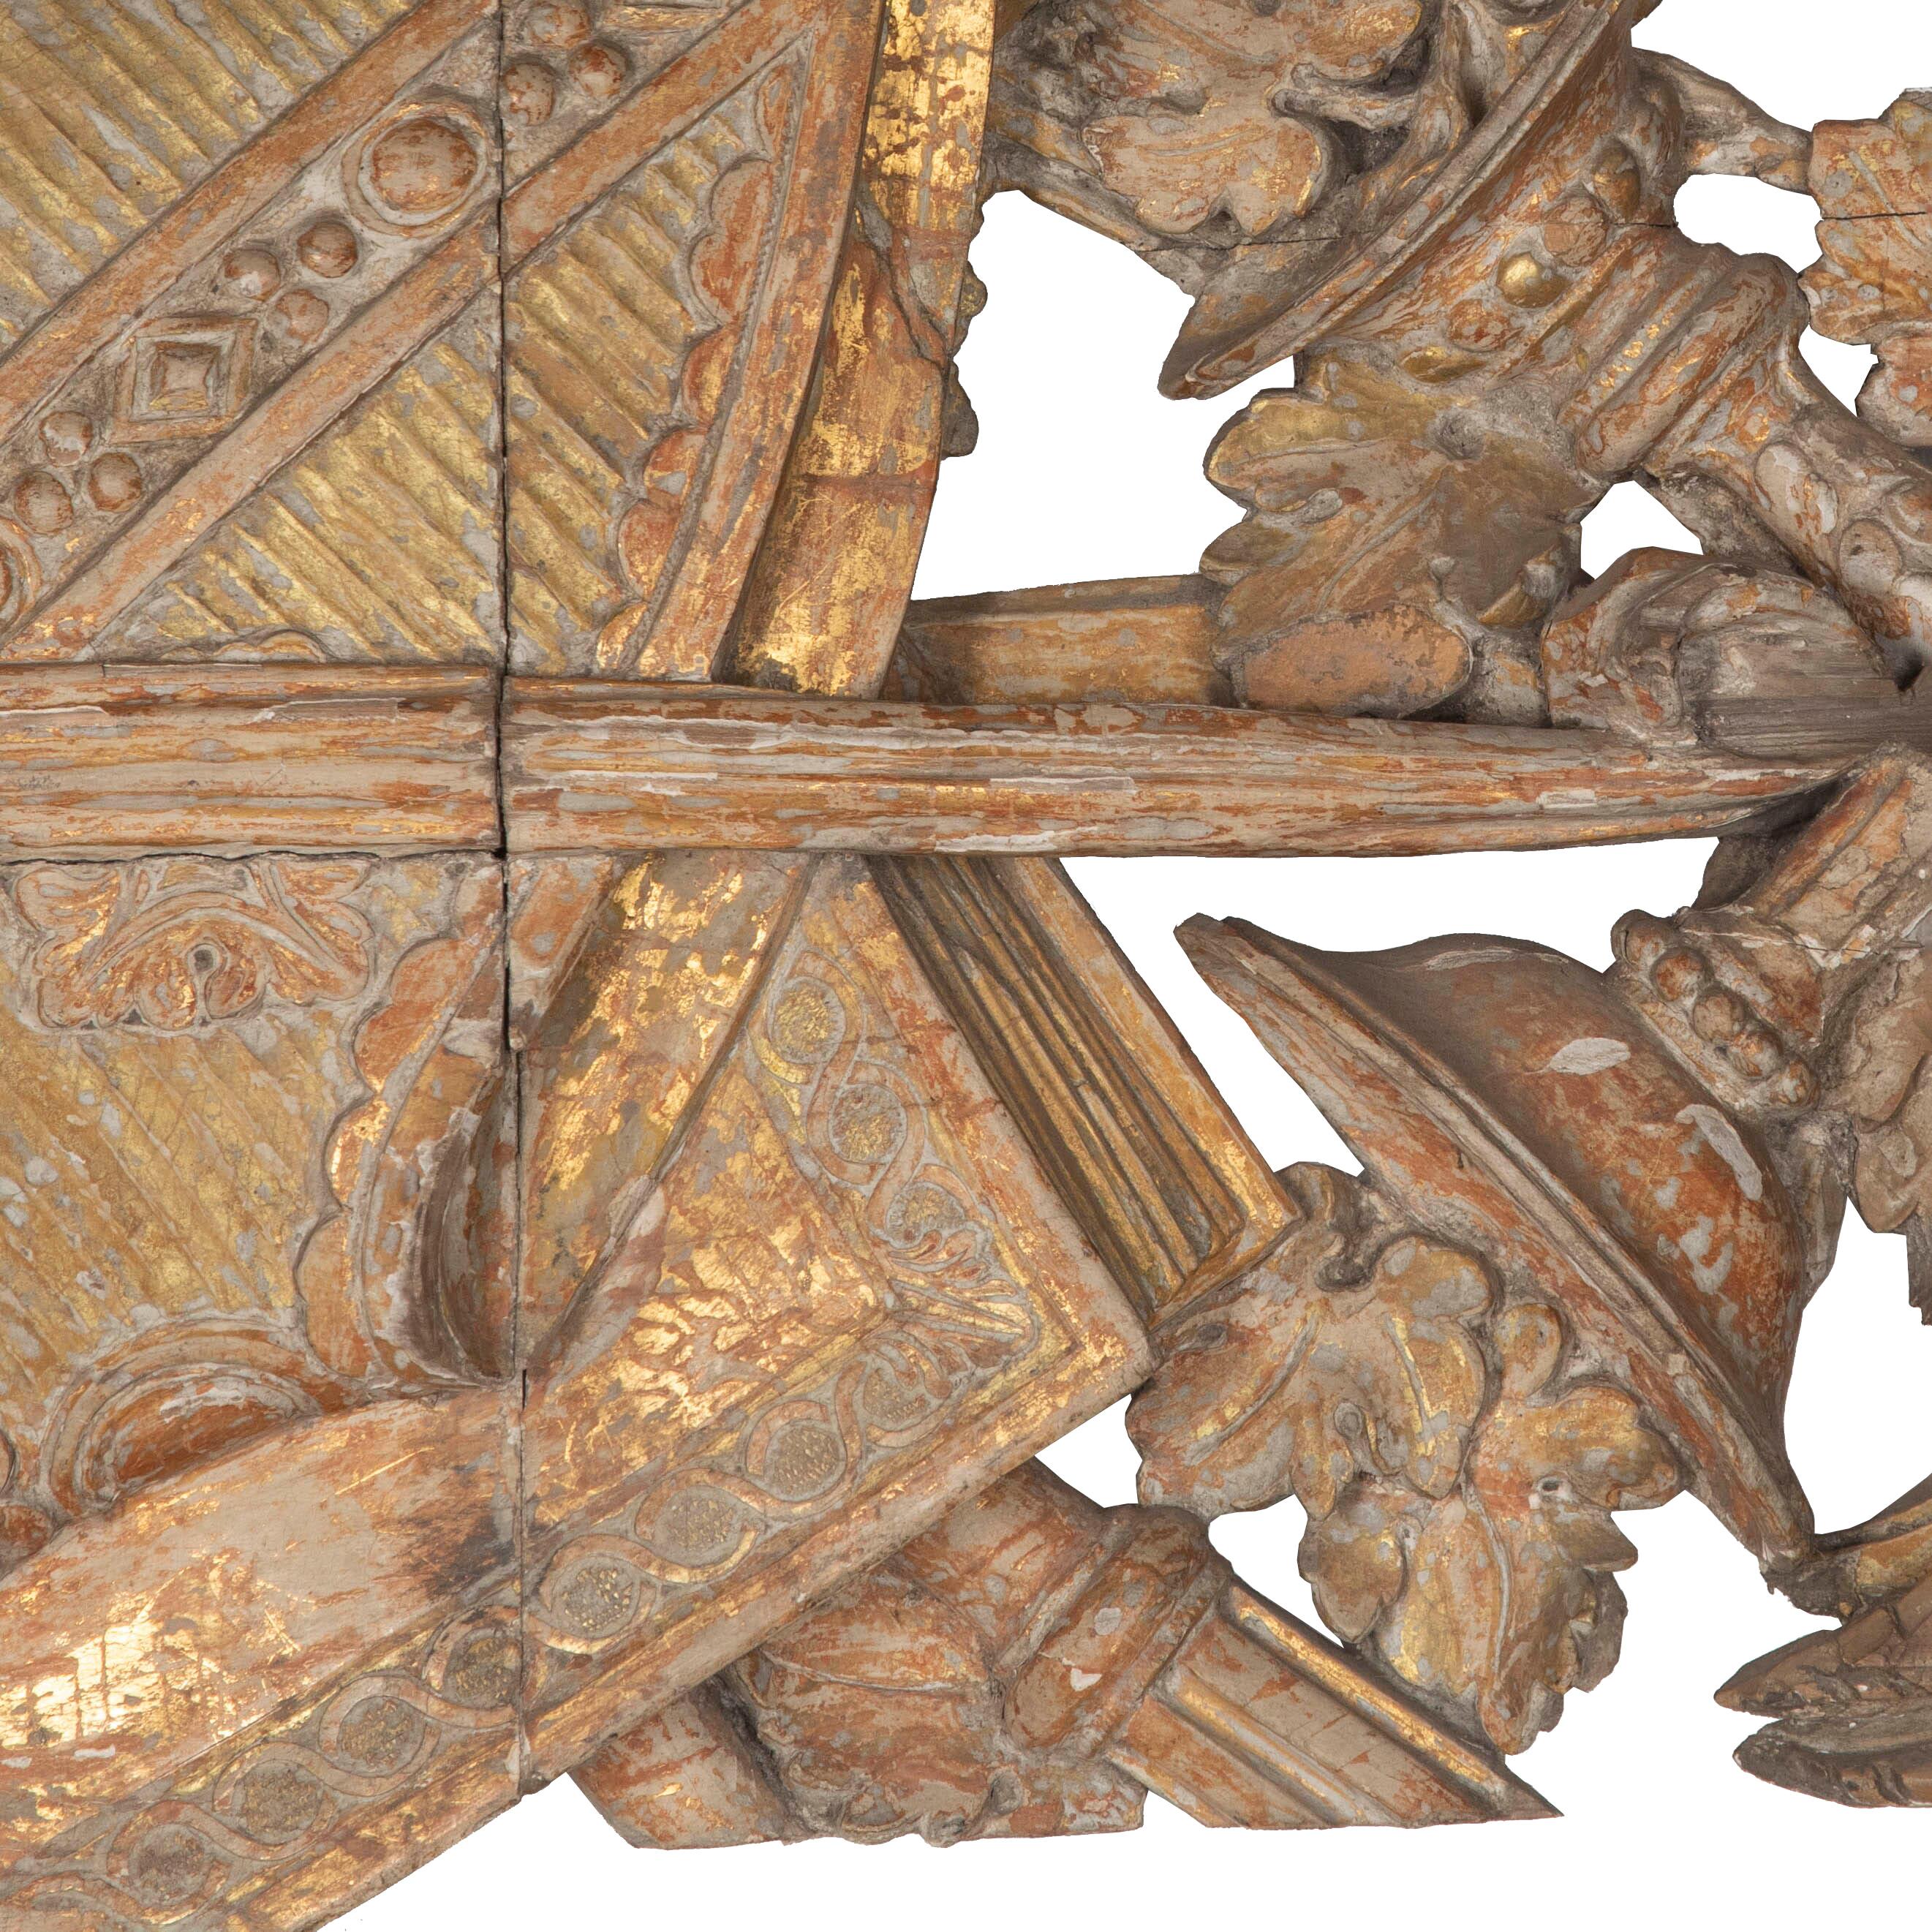 Exceptional 19th Century carved wooden fragment.
Depicting foliate detailing such as grapes and a crown. With good time-worn gilding throughout. 
Circa 1880. 